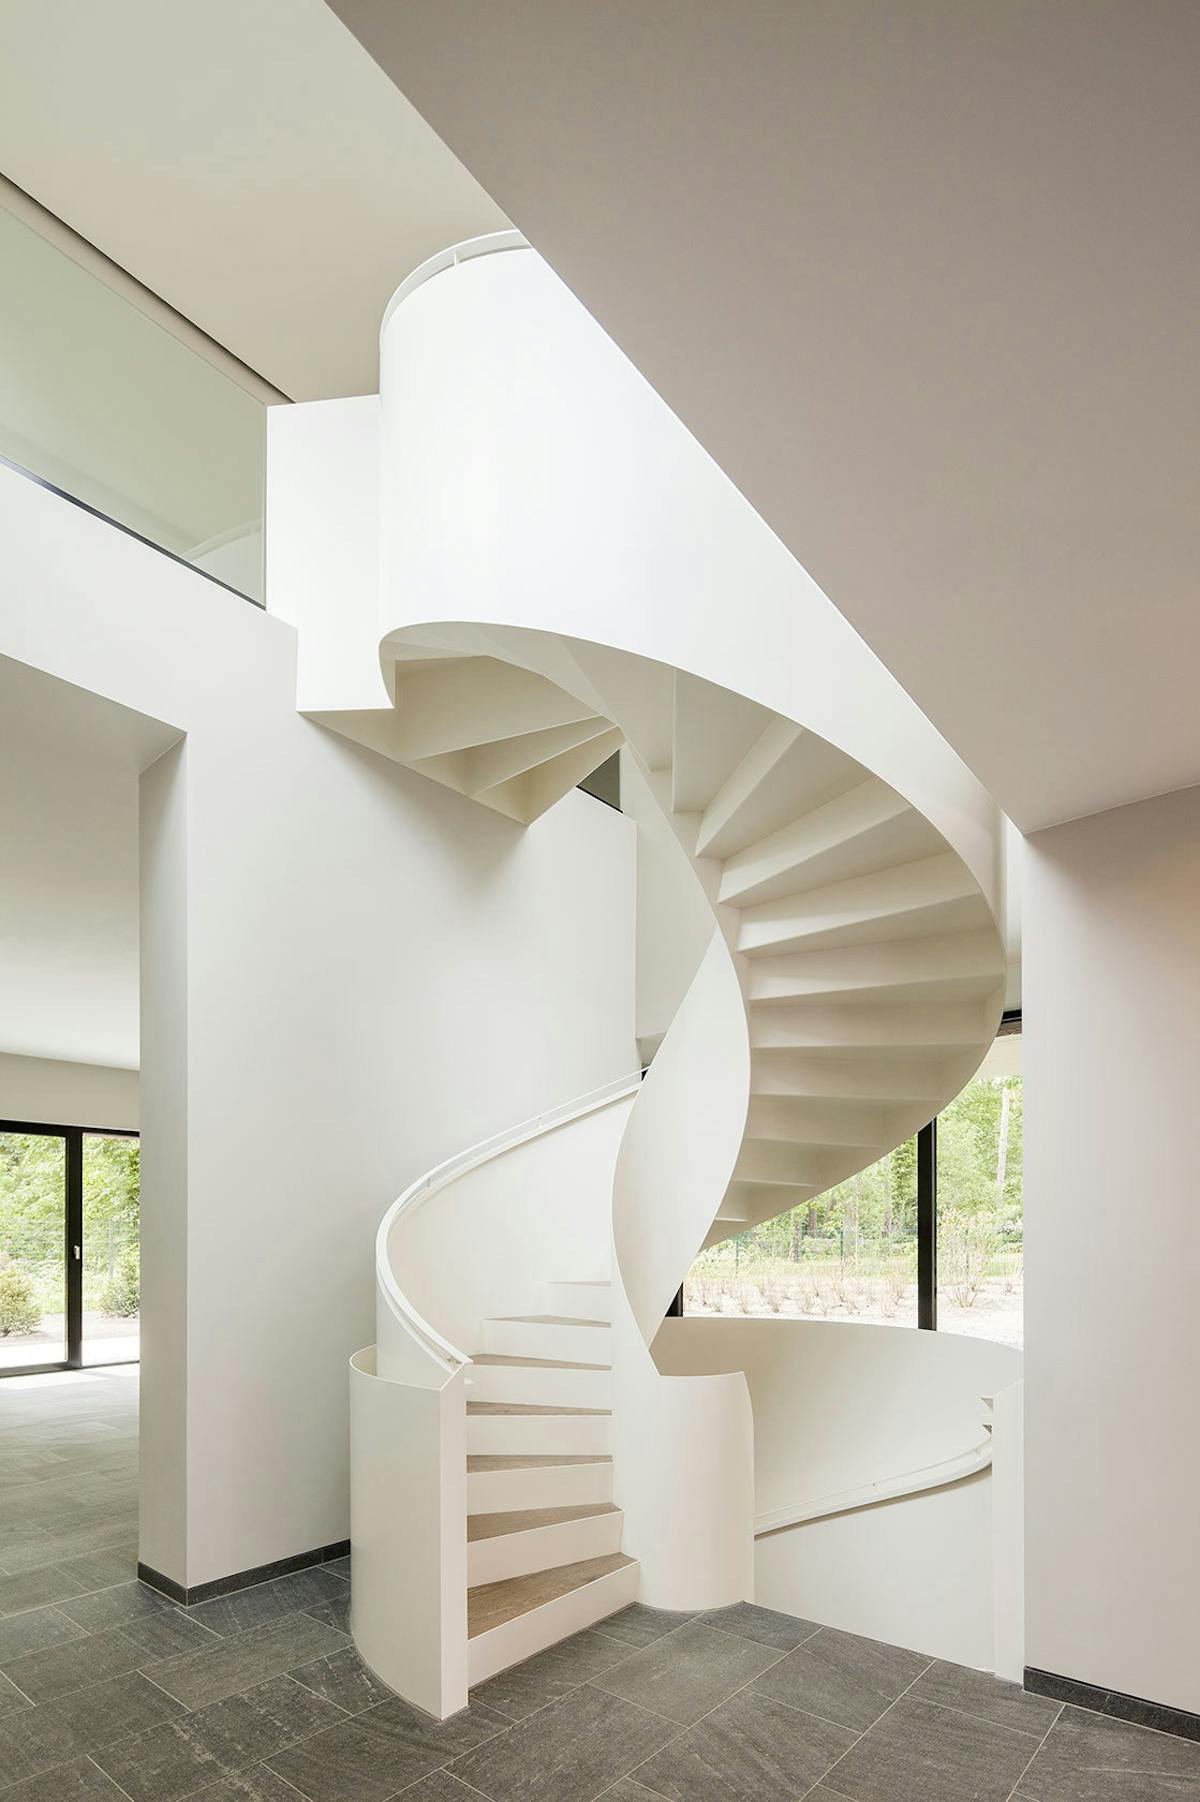 Ten Top Images on Archinect's "Stairs" Pinterest Board News Archinect